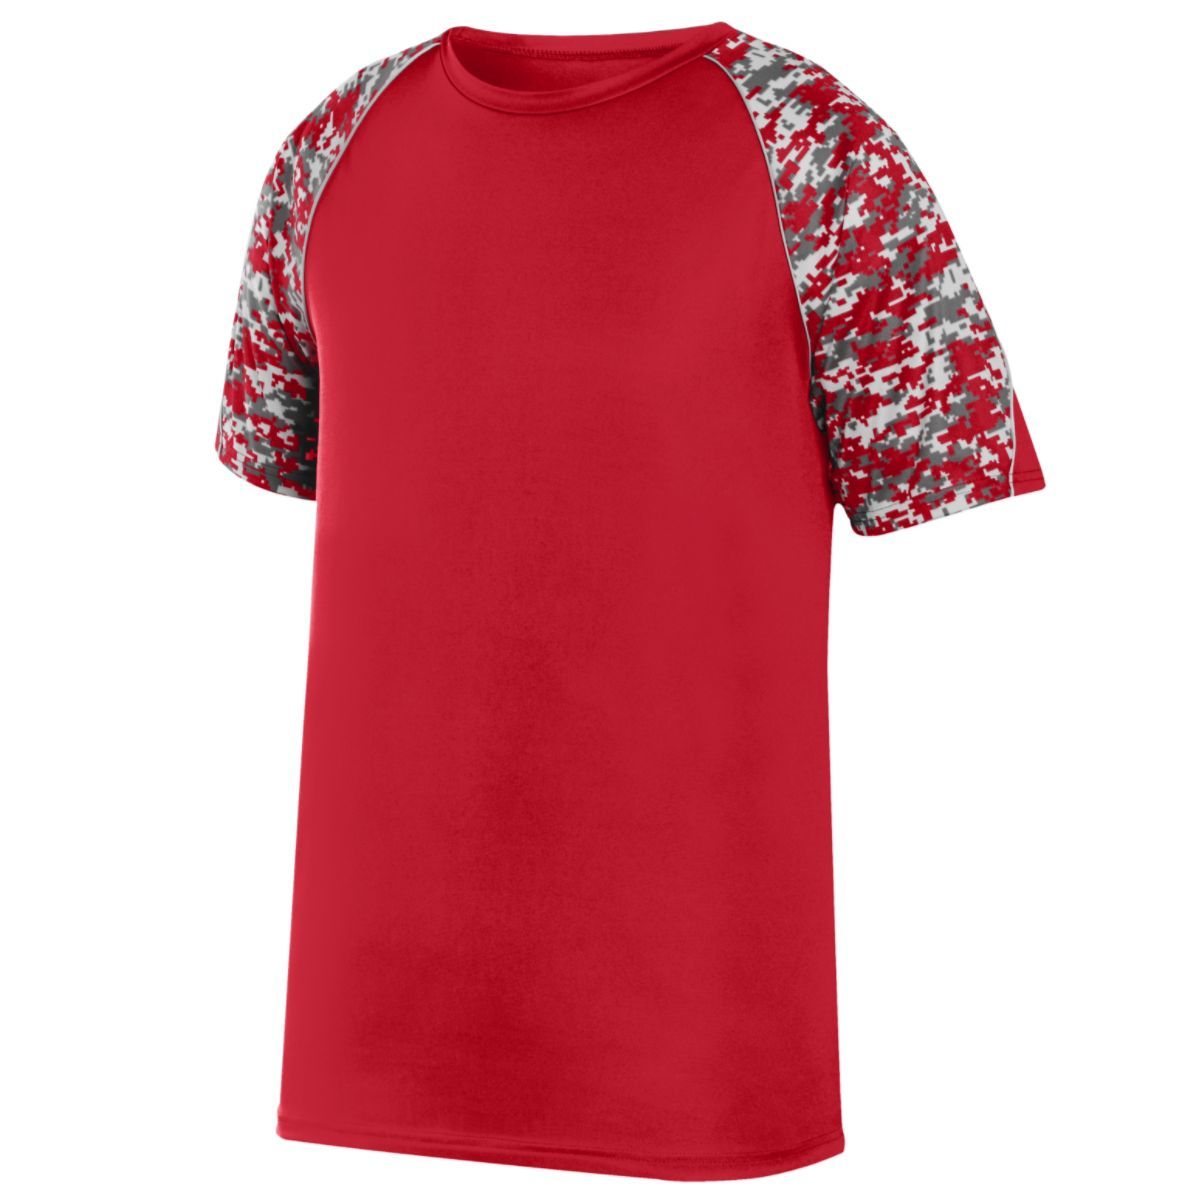 Augusta Sportswear Youth Color Block Digi Camo Jersey in Red/Red Digi/Silver  -Part of the Youth, Youth-Jersey, Augusta-Products, Baseball, Shirts, All-Sports, All-Sports-1 product lines at KanaleyCreations.com